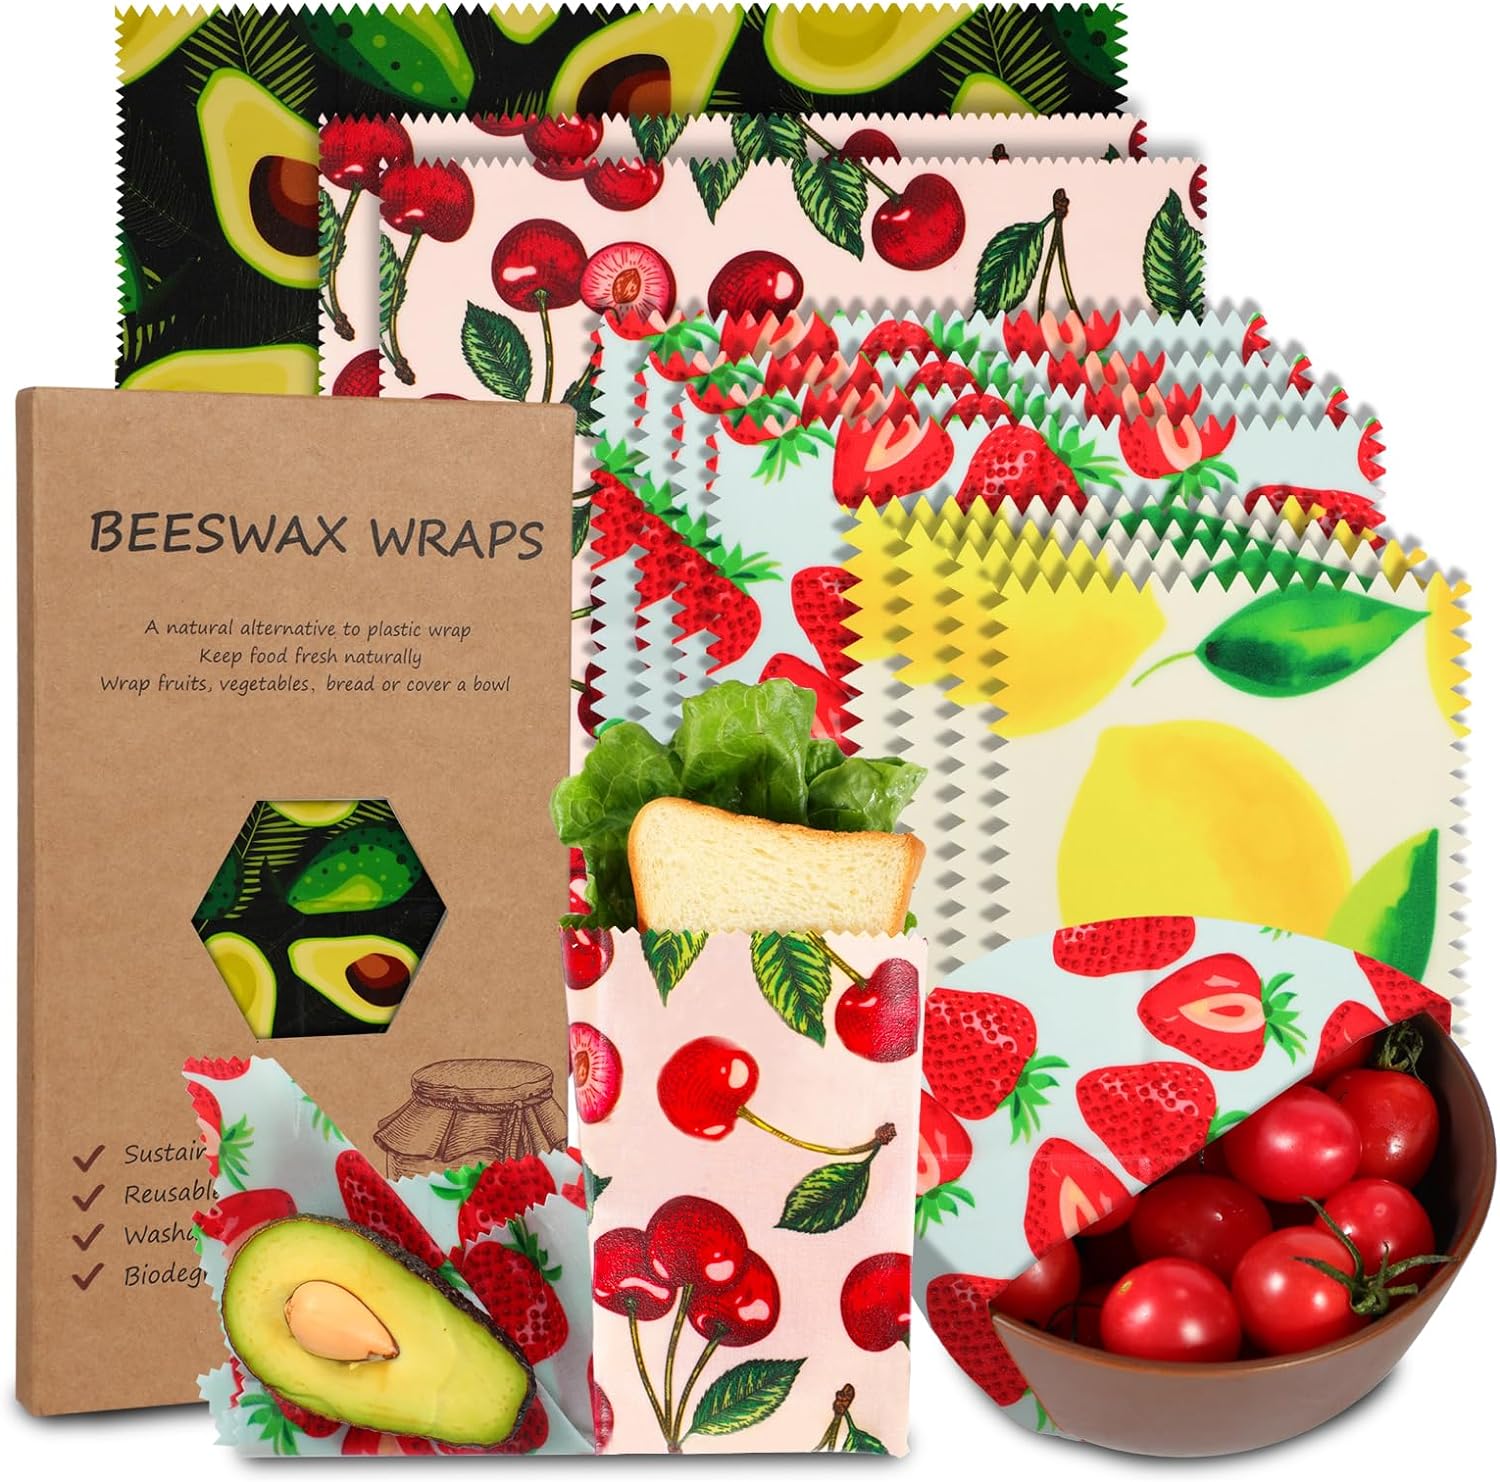 Reusable Beeswax Wrap Review:  10 Innovative Uses